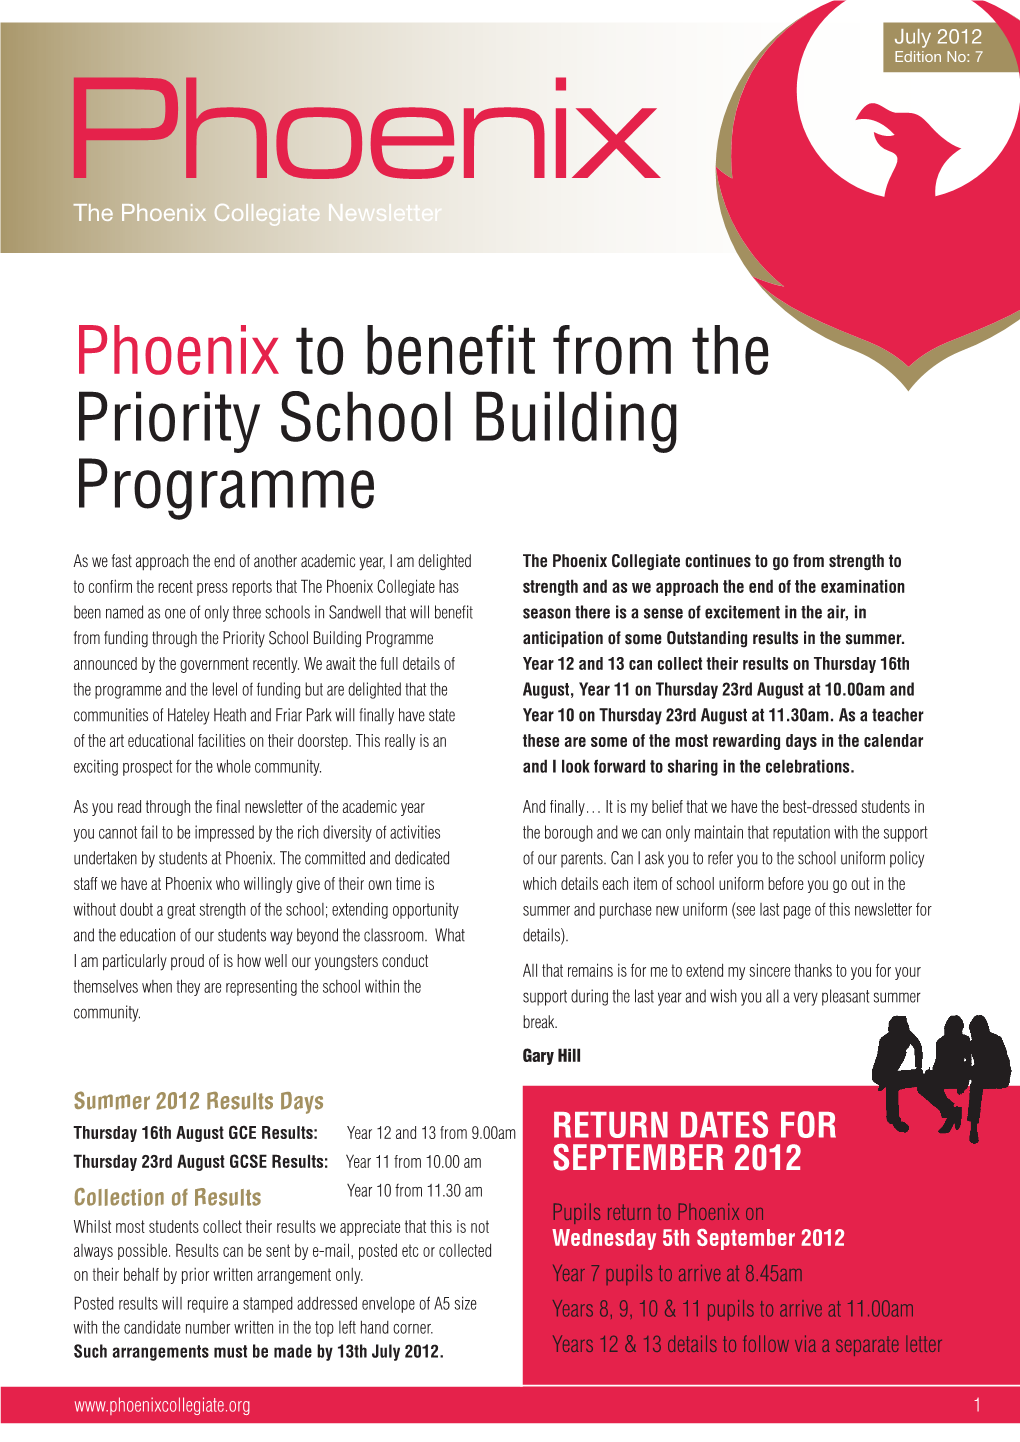 Phoenix to Benefit from the Priority School Building Programme